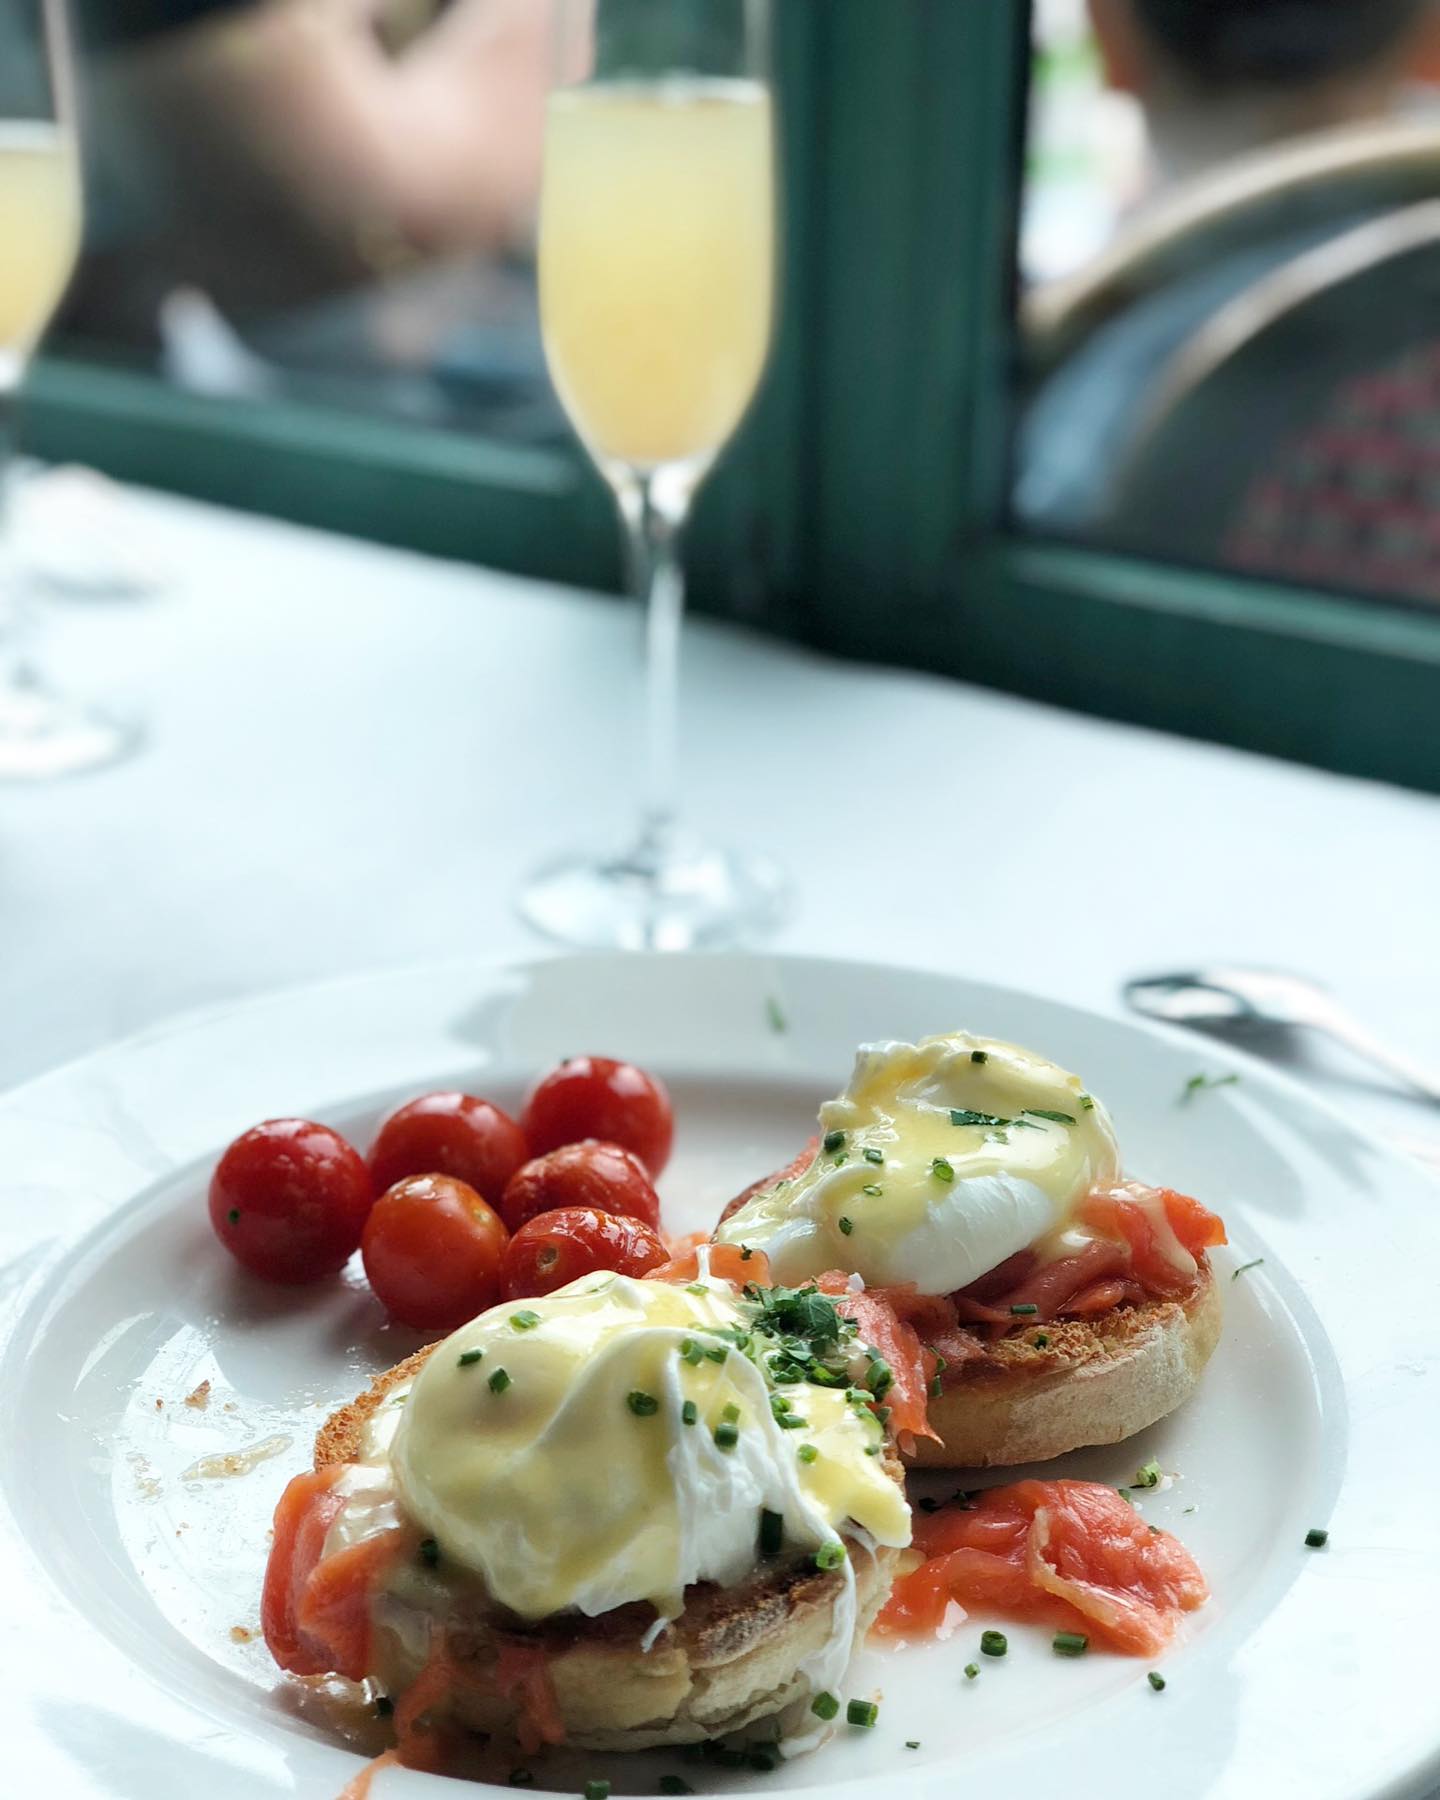 They say breakfast is the most important meal of the day and we think there is no better way to start the day than the smoked salmon eggs benedict at @monamigabibistro.